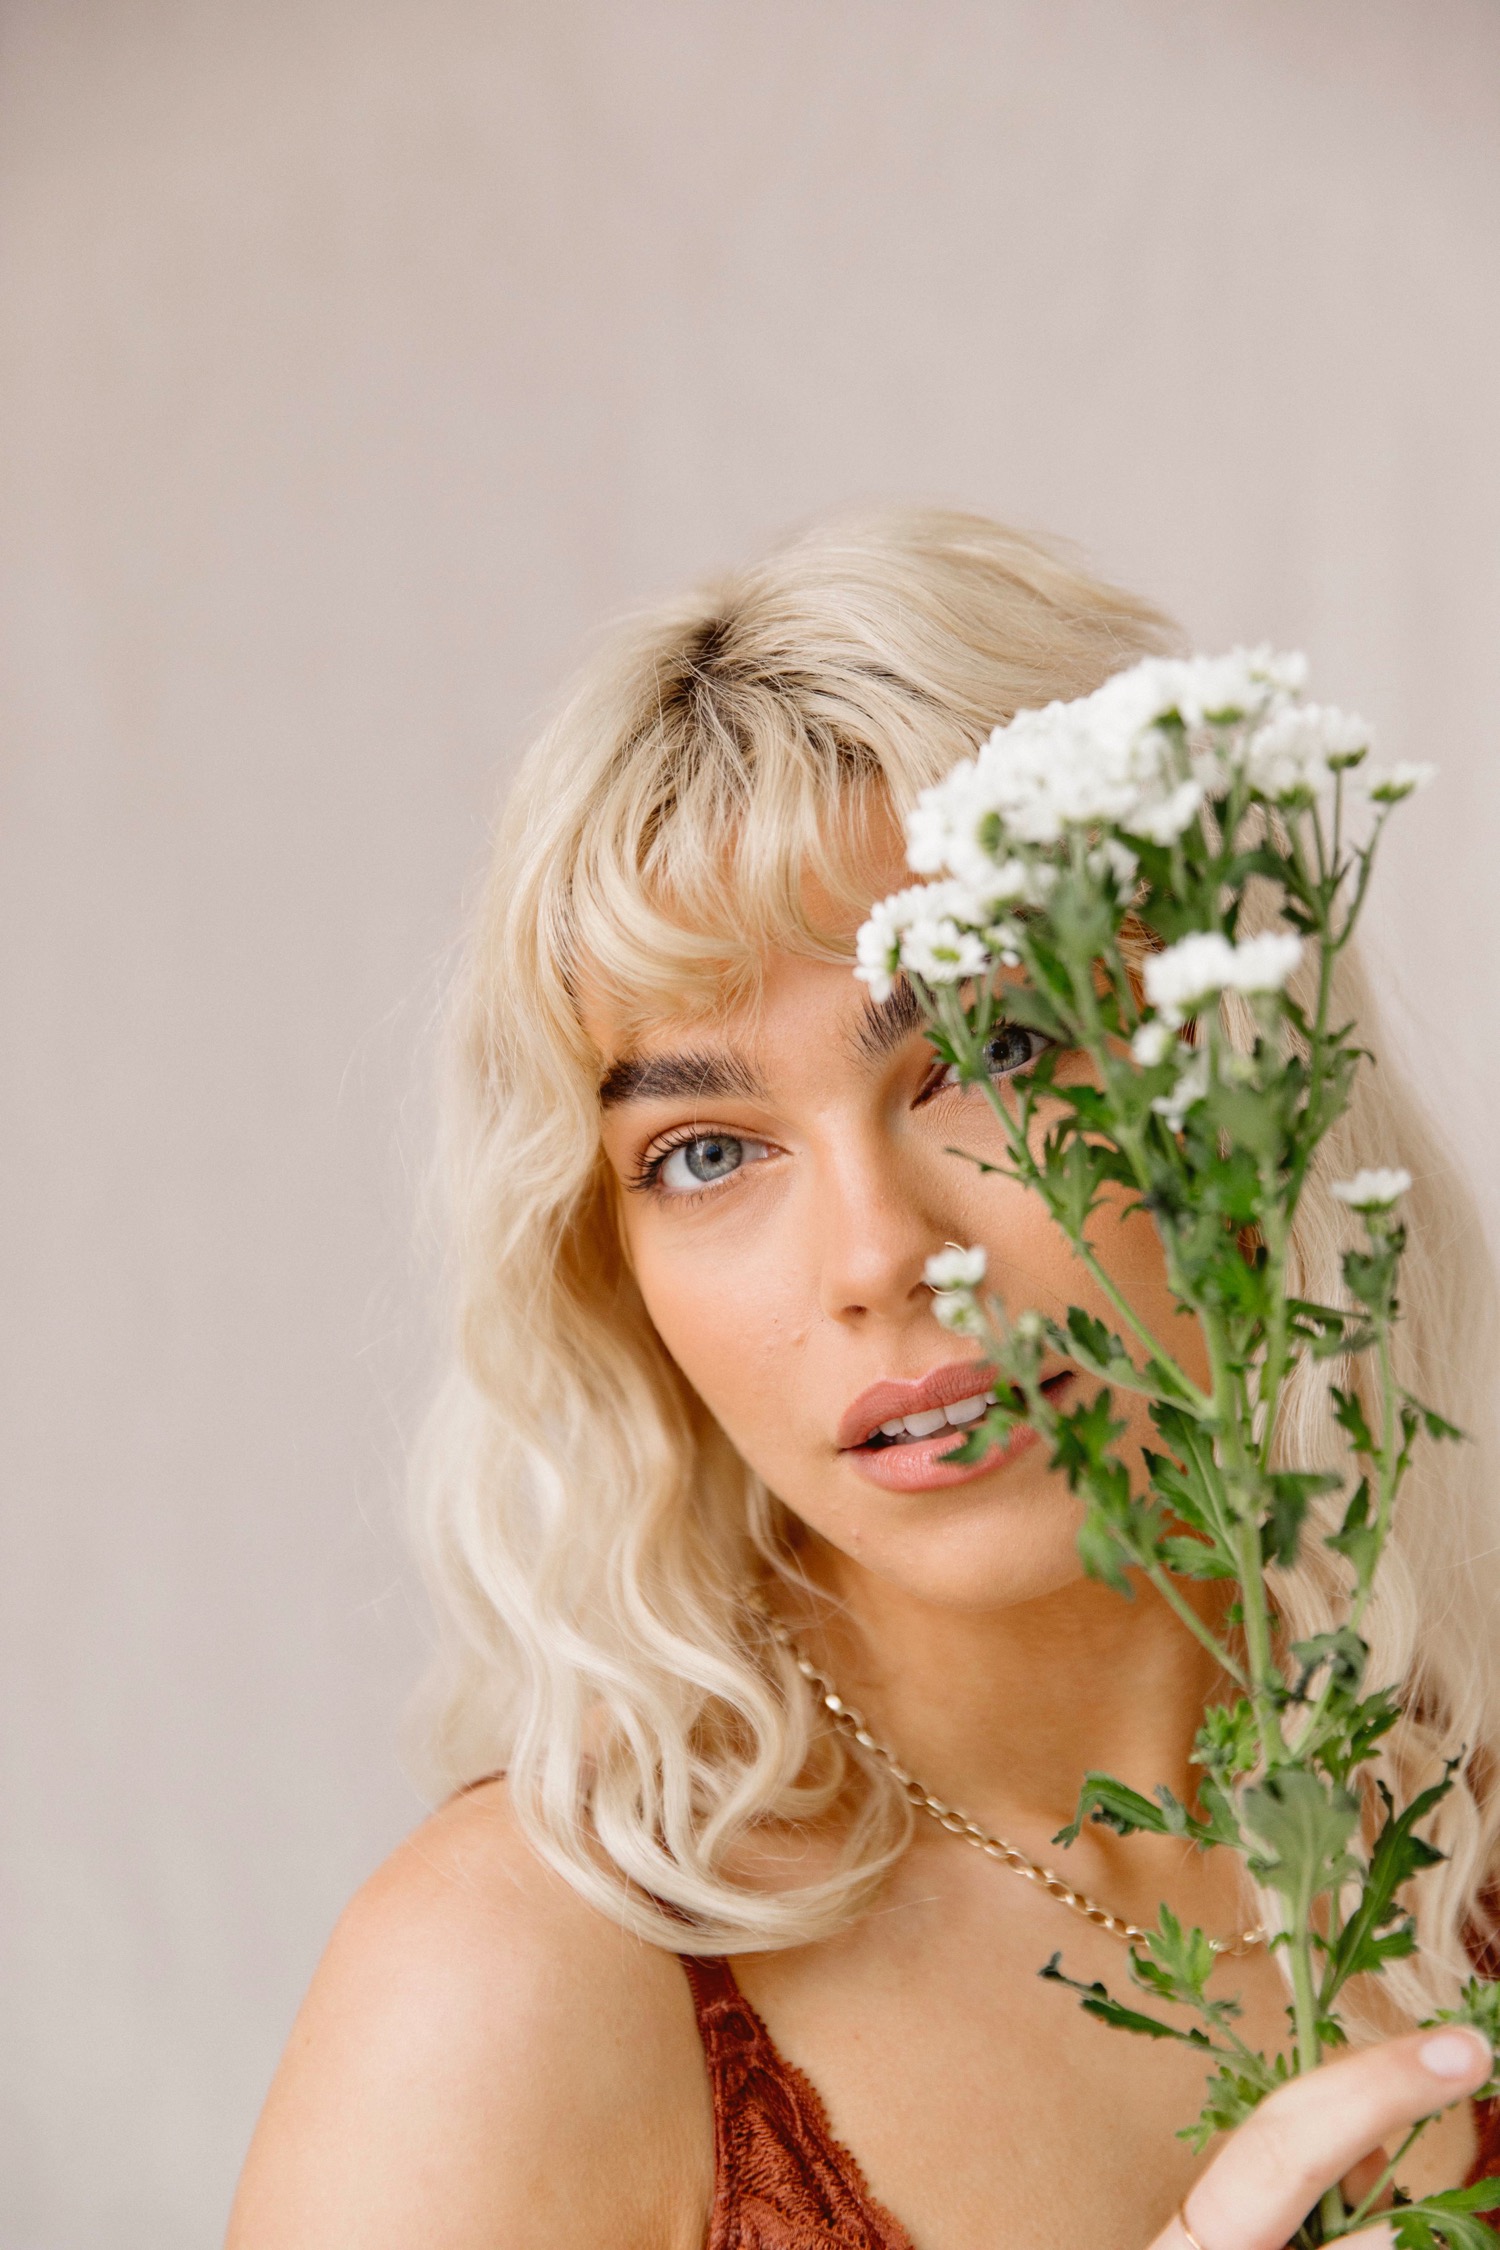 Using flowers as props in photoshoot with a model